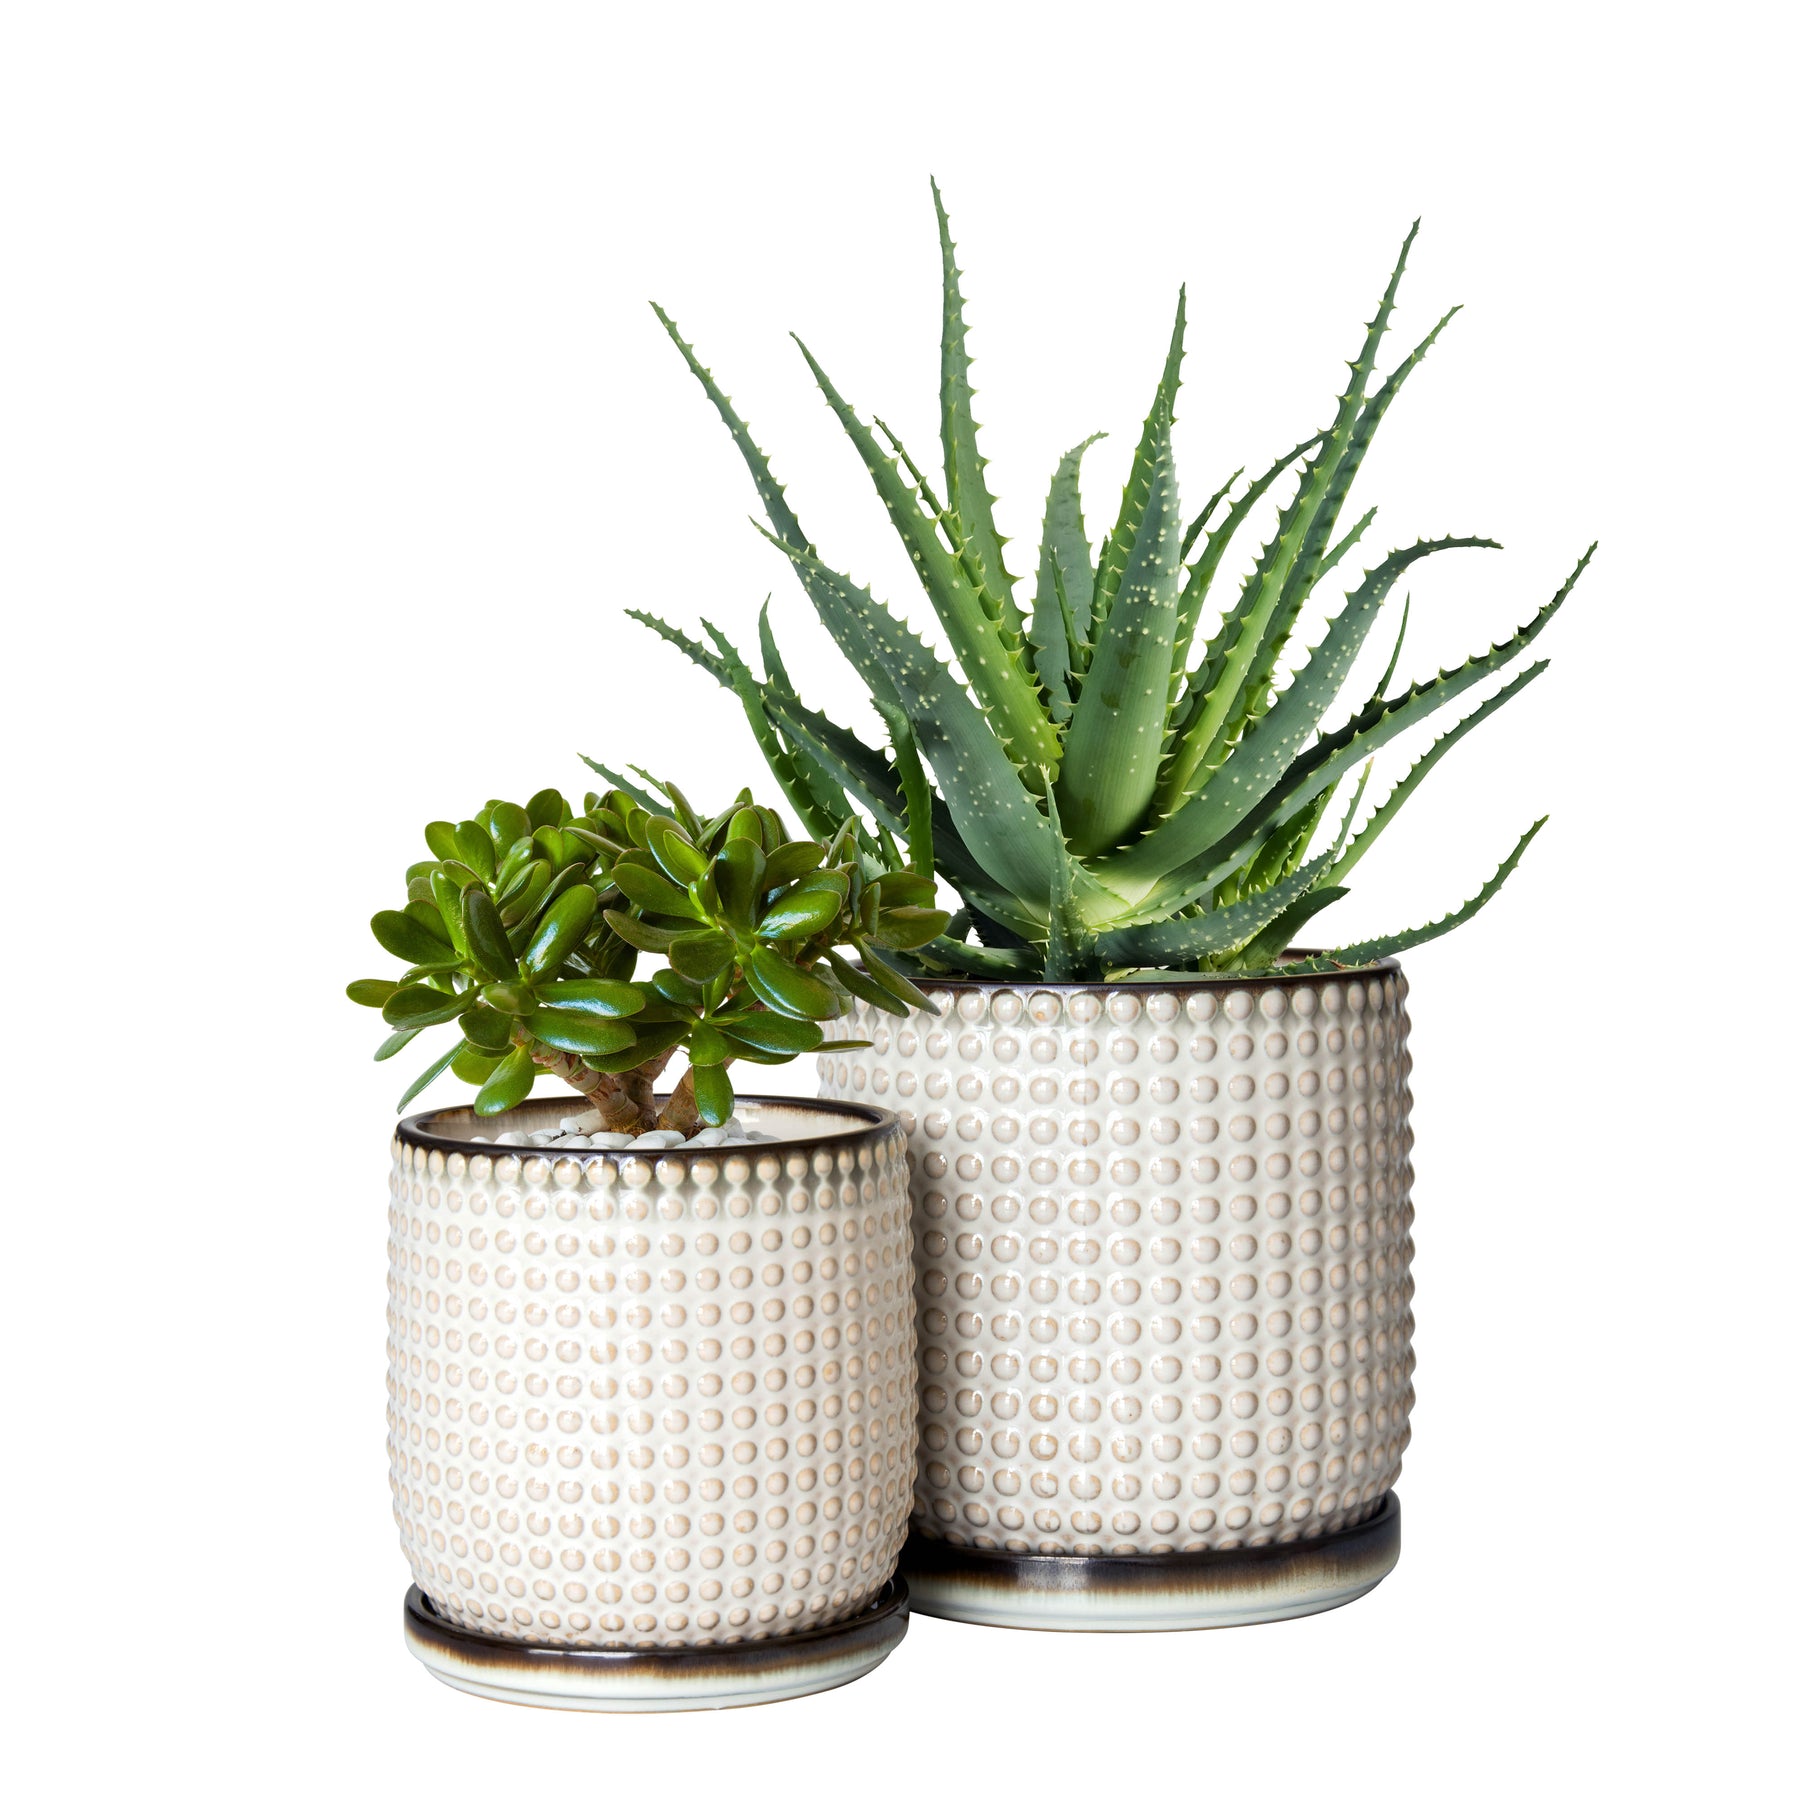 D'vine Dev Set of 2 Stoneware Planter Pots, Ceramic Pot with Drainage Hole  and Saucers, 4.5 Inch 5.8 Inch, Dark Blue Green, 99-D-TB